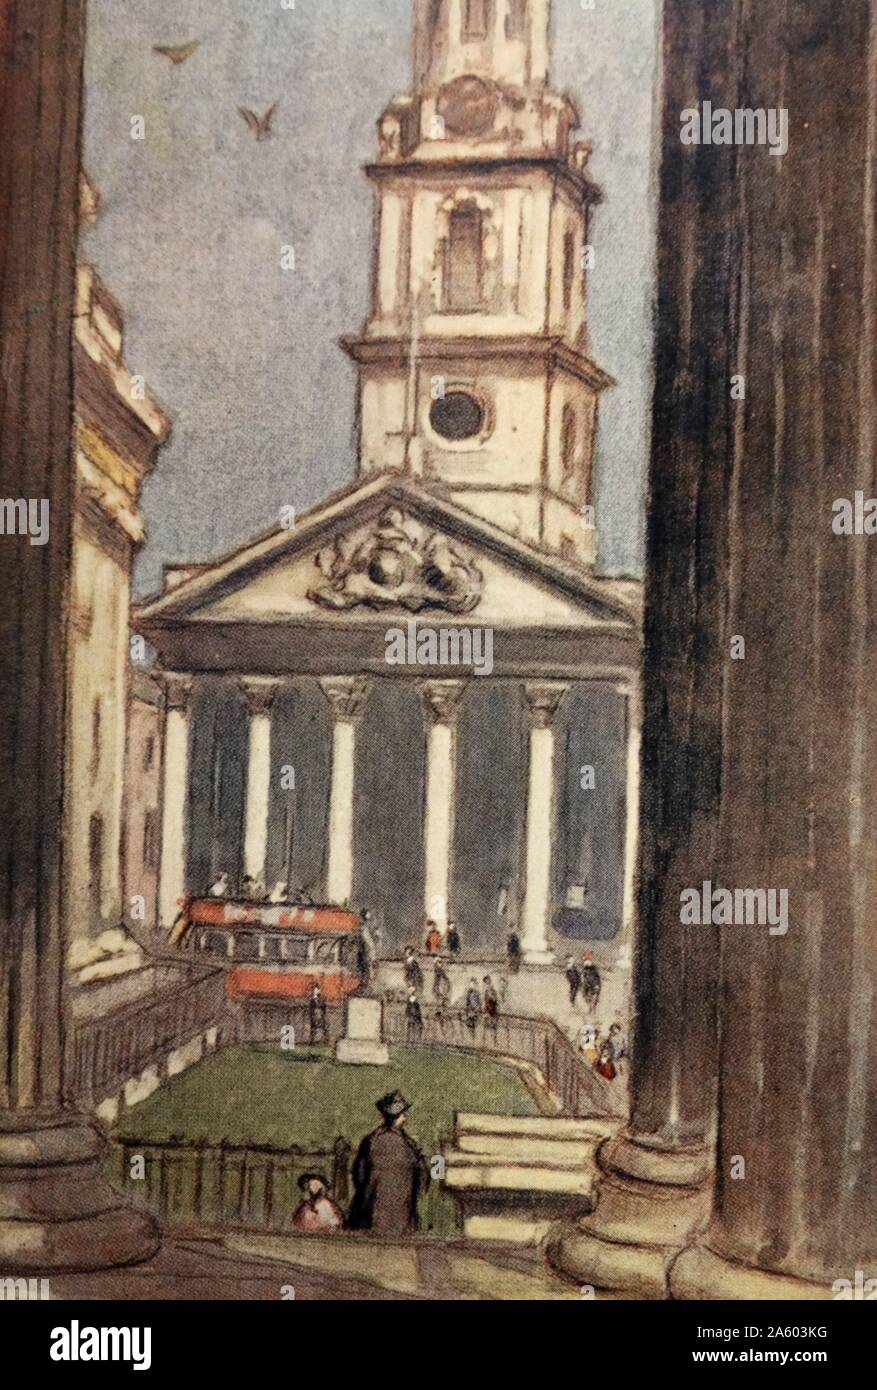 Coloured sketch of St Martin-in-the-Fields, an English Anglican church at the north-east corner of Trafalgar Square in the City of Westminster, London. Dated 20th Century Stock Photo